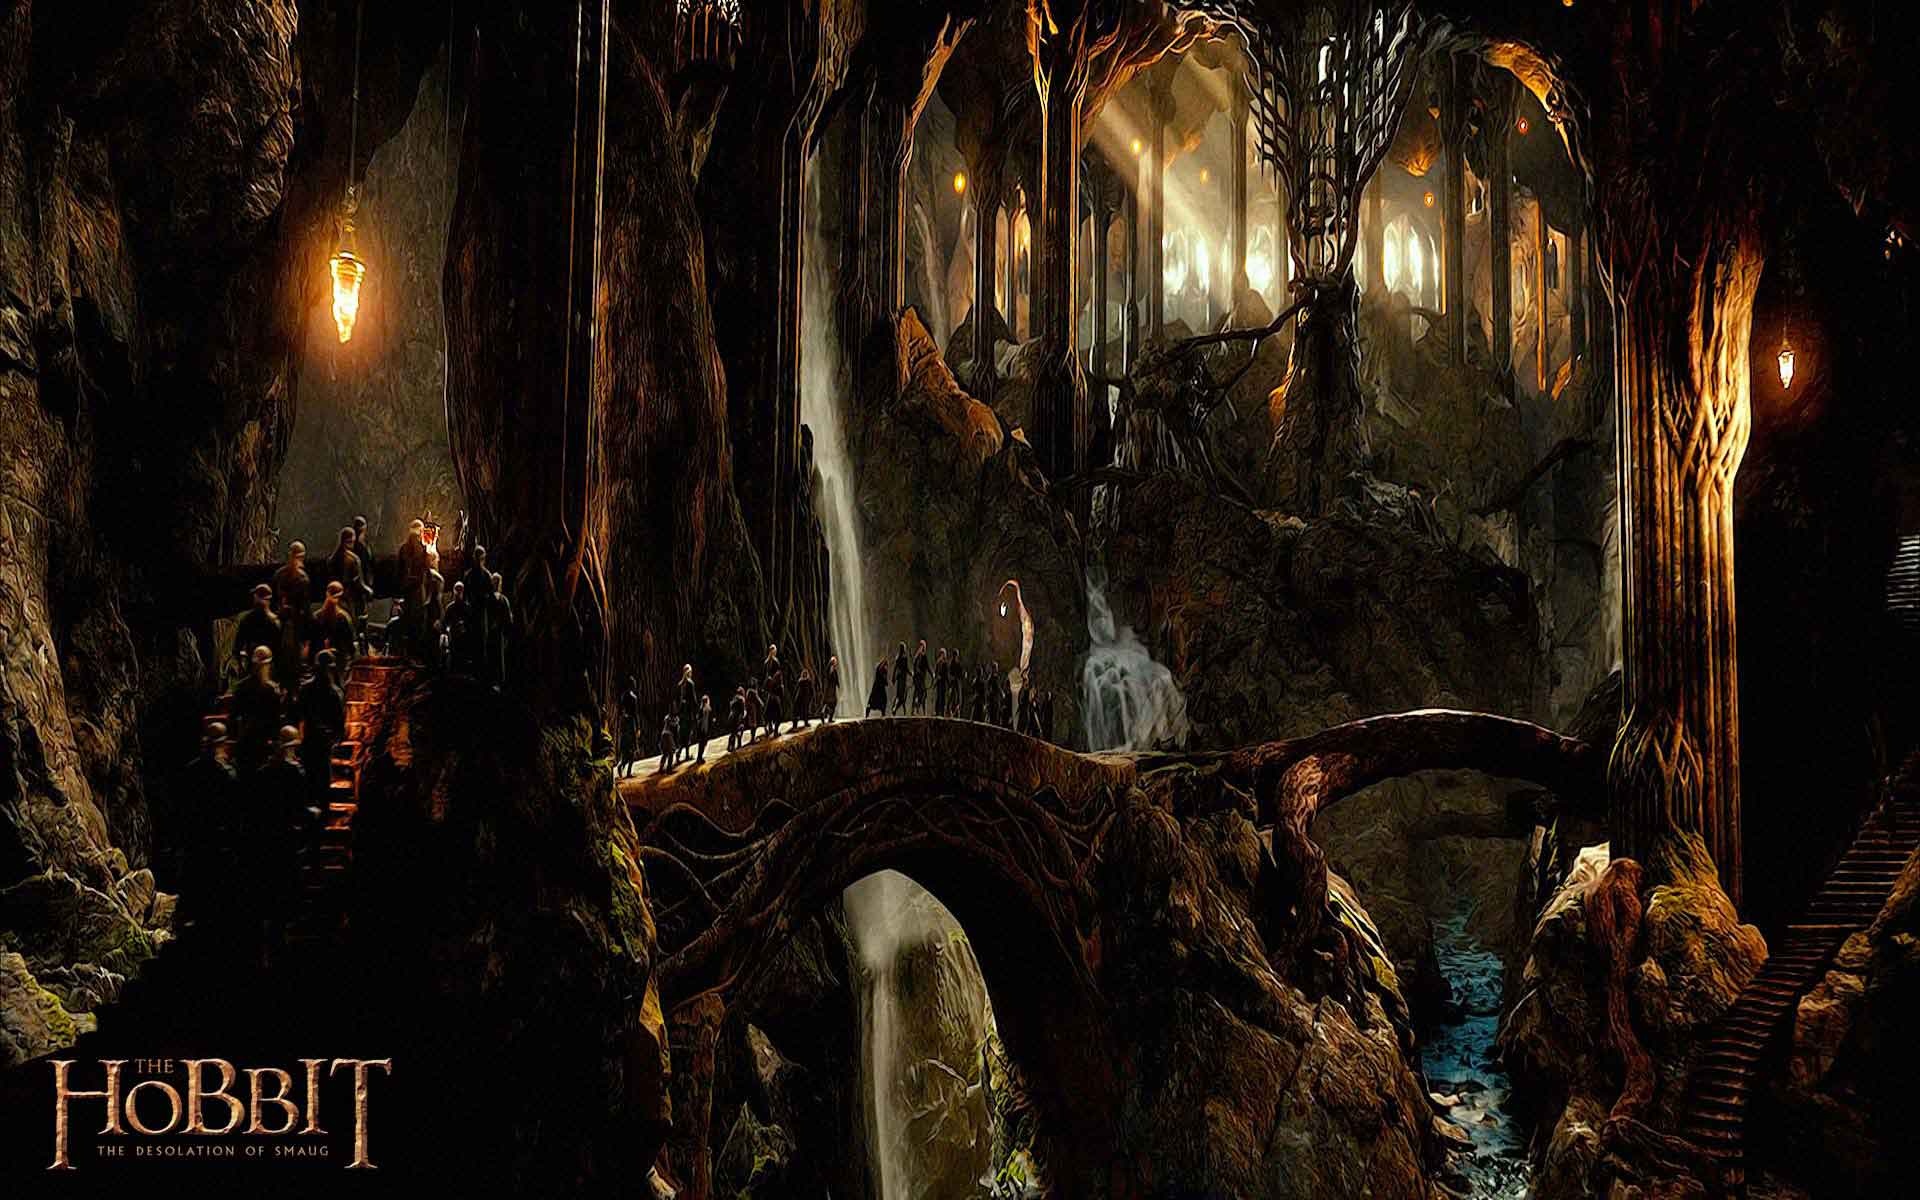 Woodland Realm, The Hobbit wallpapers, Epic adventure, Middle Earth, 1920x1200 HD Desktop